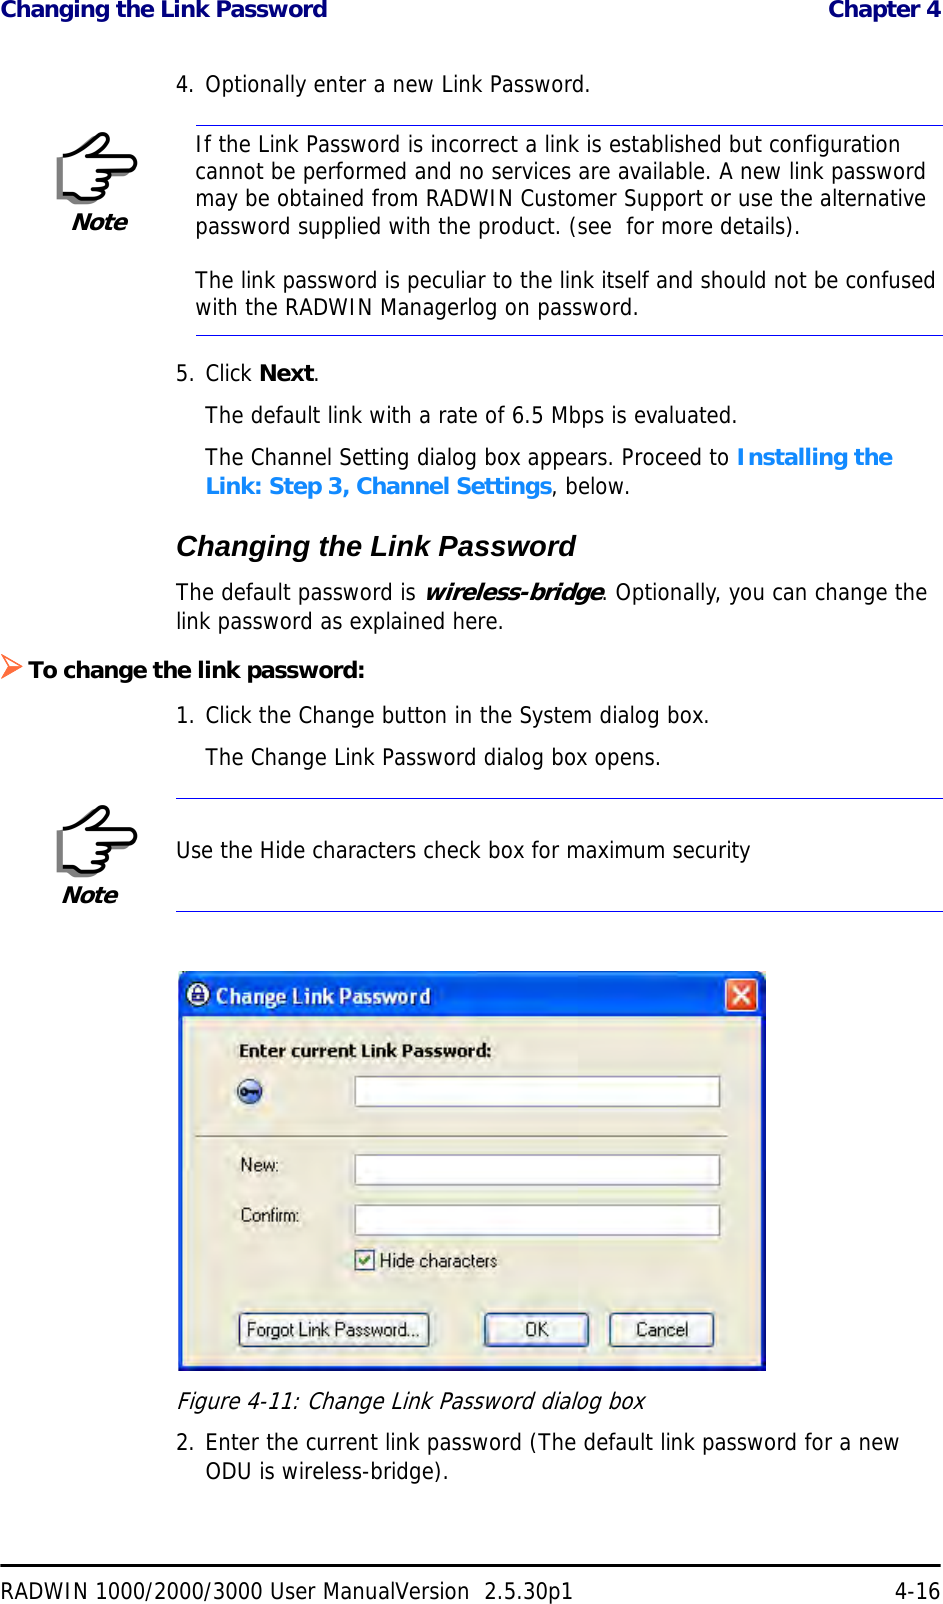 Changing the Link Password  Chapter 4RADWIN 1000/2000/3000 User ManualVersion  2.5.30p1 4-164. Optionally enter a new Link Password. 5. Click Next.The default link with a rate of 6.5 Mbps is evaluated.The Channel Setting dialog box appears. Proceed to Installing the Link: Step 3, Channel Settings, below.Changing the Link PasswordThe default password is wireless-bridge. Optionally, you can change the link password as explained here.¾To change the link password:1. Click the Change button in the System dialog box.The Change Link Password dialog box opens.Figure 4-11: Change Link Password dialog box2. Enter the current link password (The default link password for a new ODU is wireless-bridge).NoteIf the Link Password is incorrect a link is established but configuration cannot be performed and no services are available. A new link password may be obtained from RADWIN Customer Support or use the alternative password supplied with the product. (see  for more details).The link password is peculiar to the link itself and should not be confused with the RADWIN Managerlog on password.NoteUse the Hide characters check box for maximum security